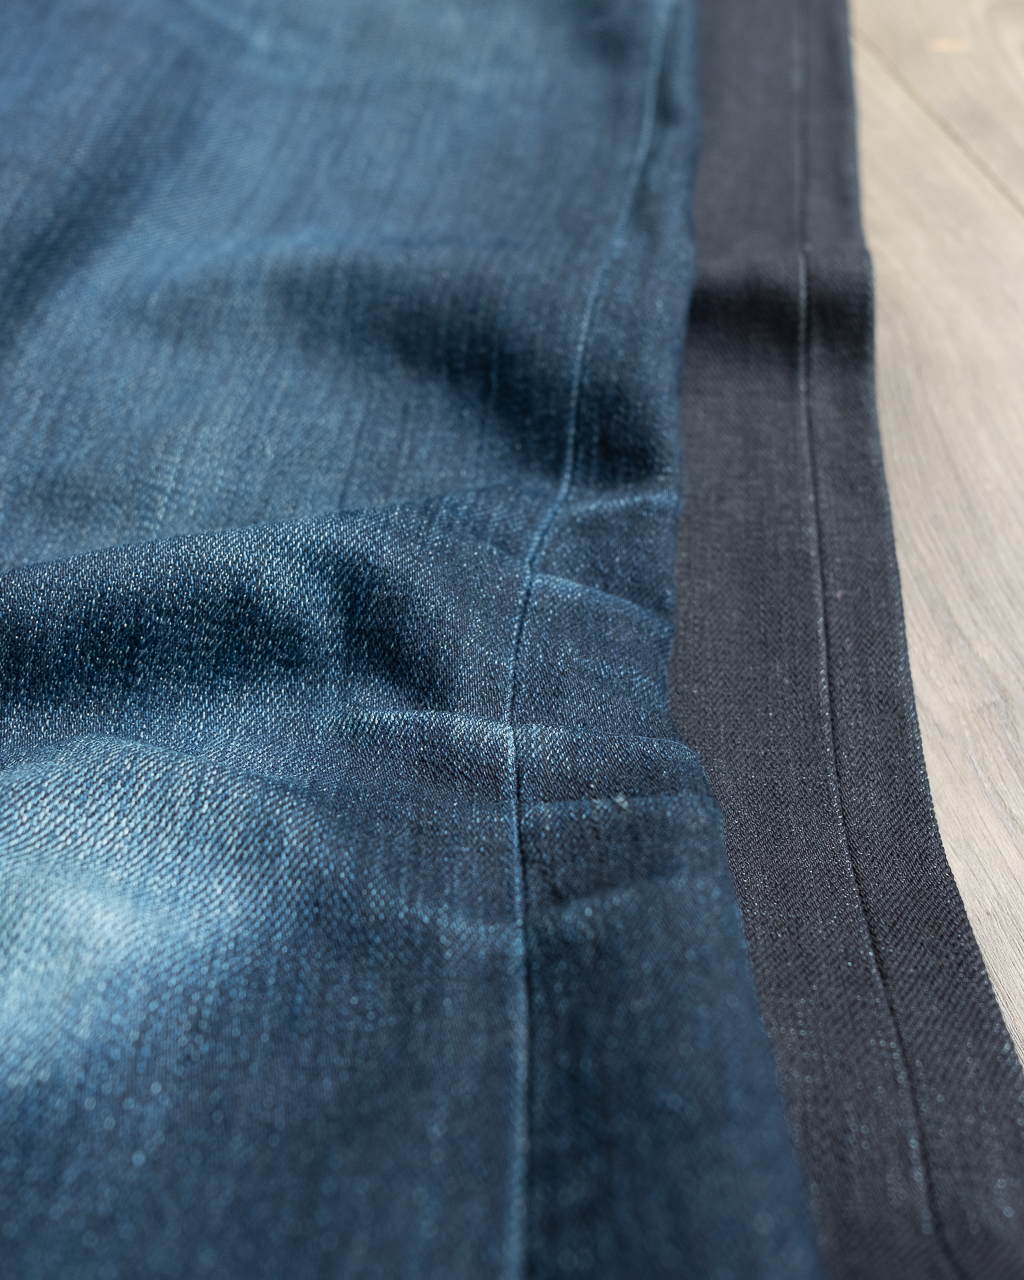 fade comparison between new railcar fine goods x034 denim and two year old pair